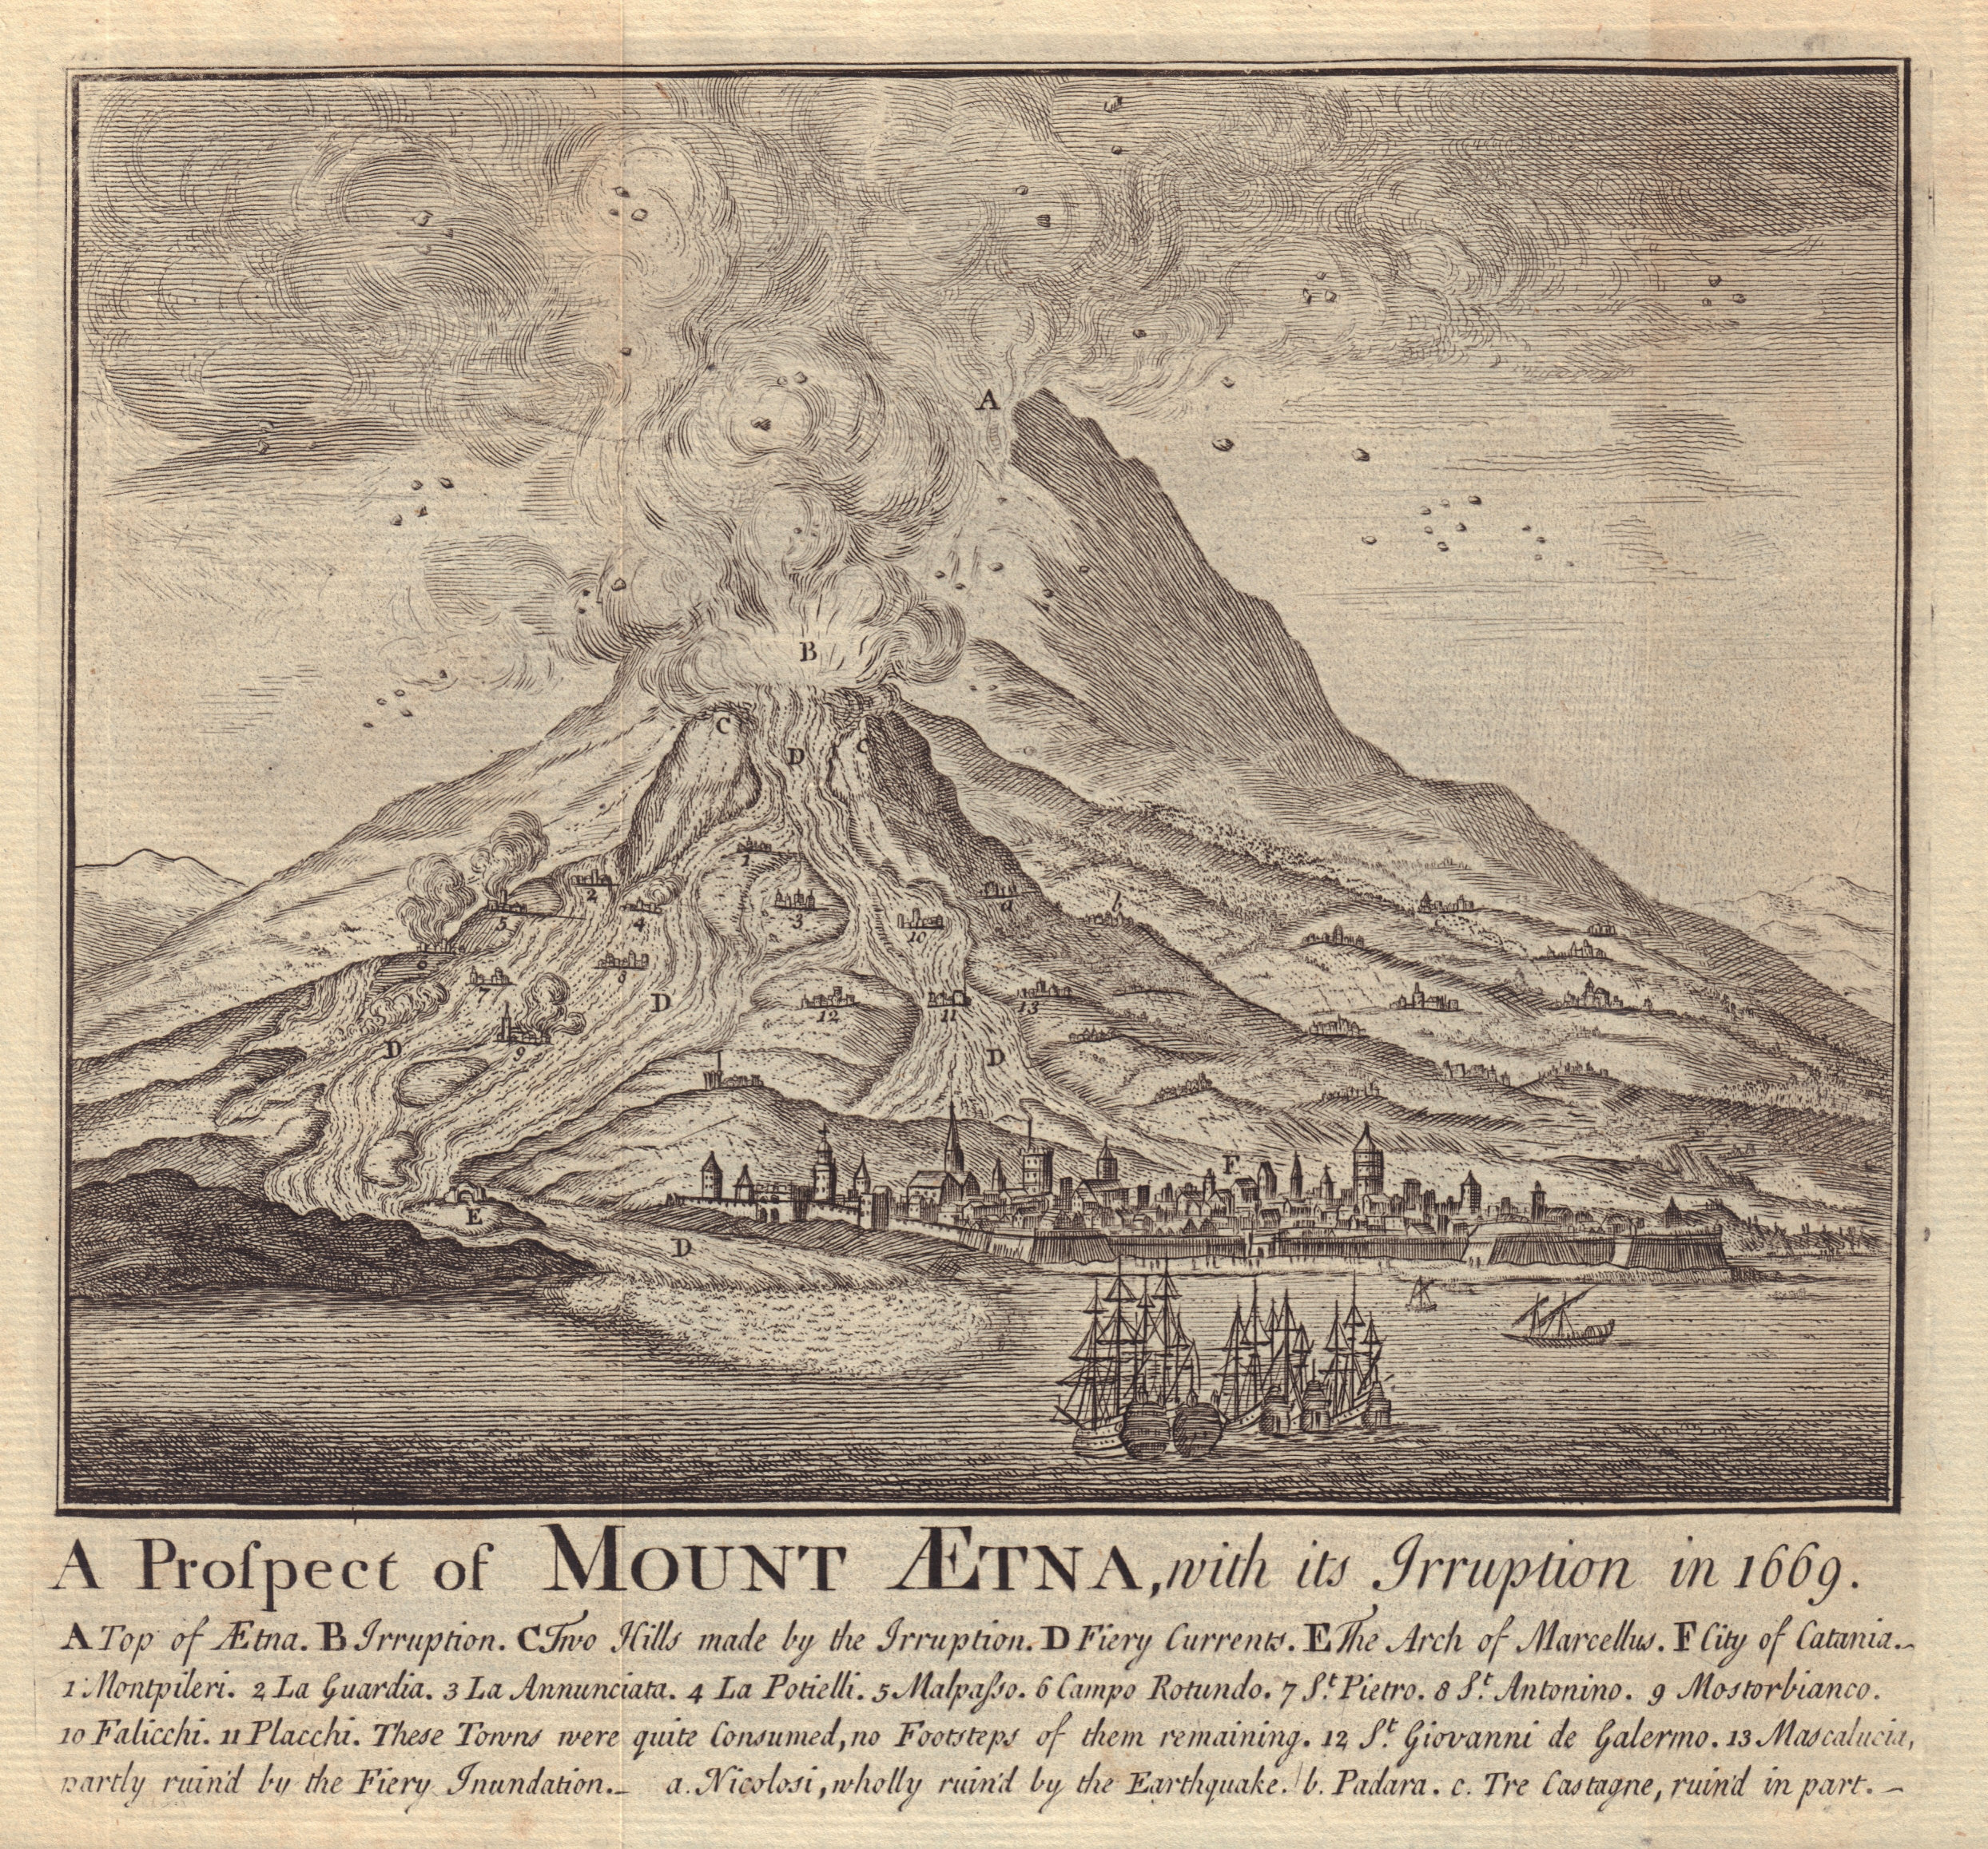 Prospect of Mount Vesuvius with its Irruption in 1669. Eruption 1750 old print